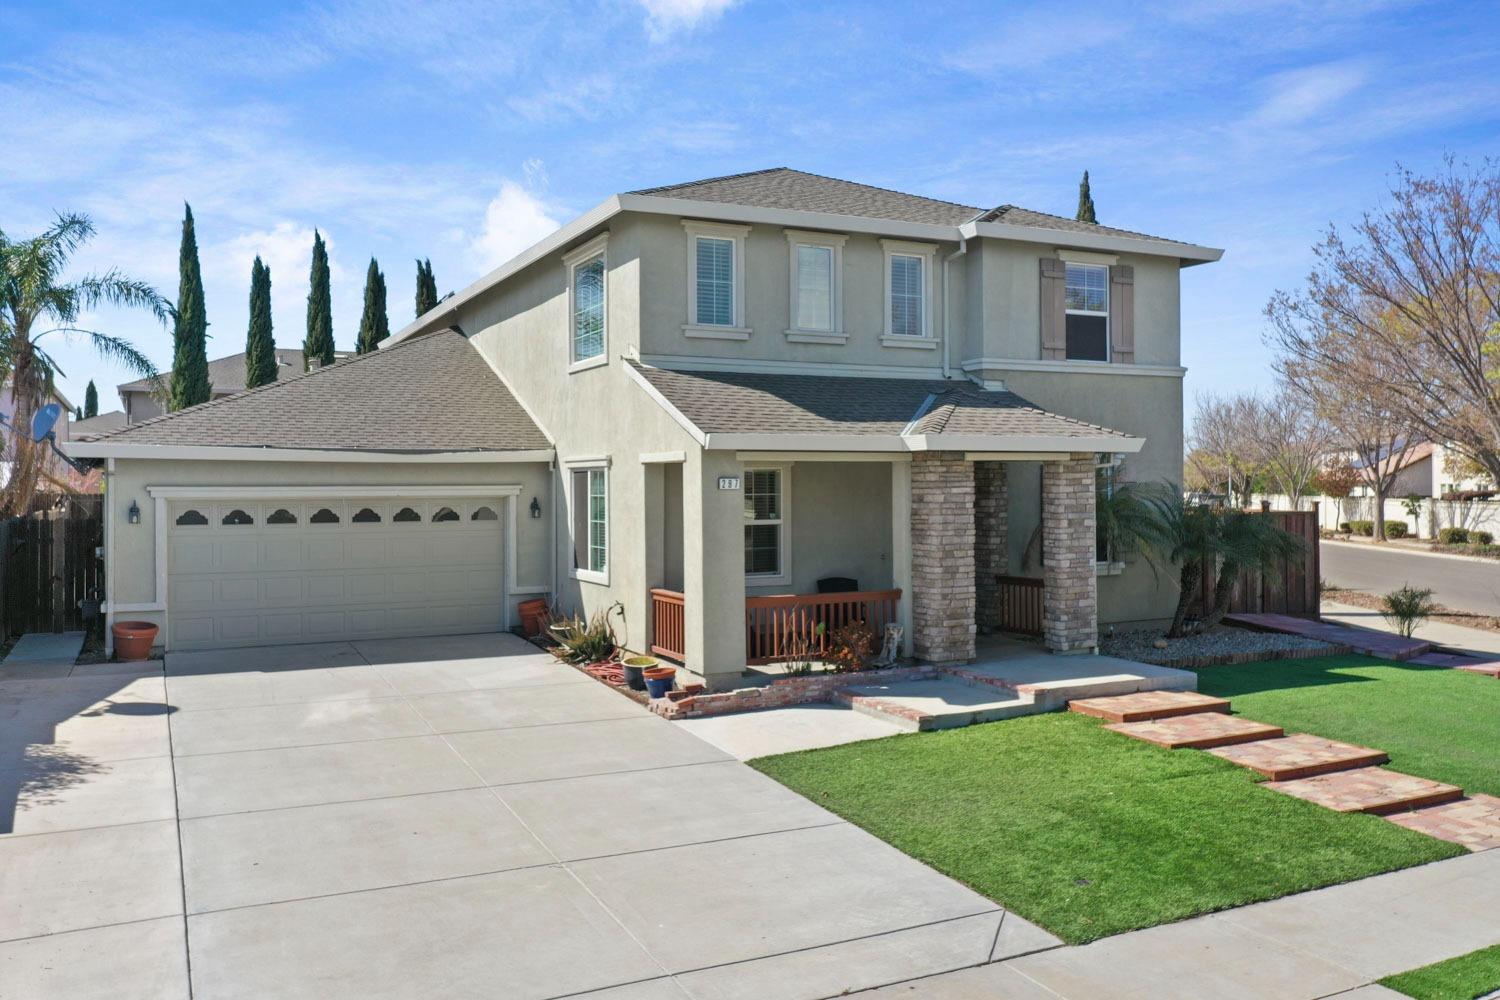 Photo of 297 Summer Phlox Ln in Patterson, CA